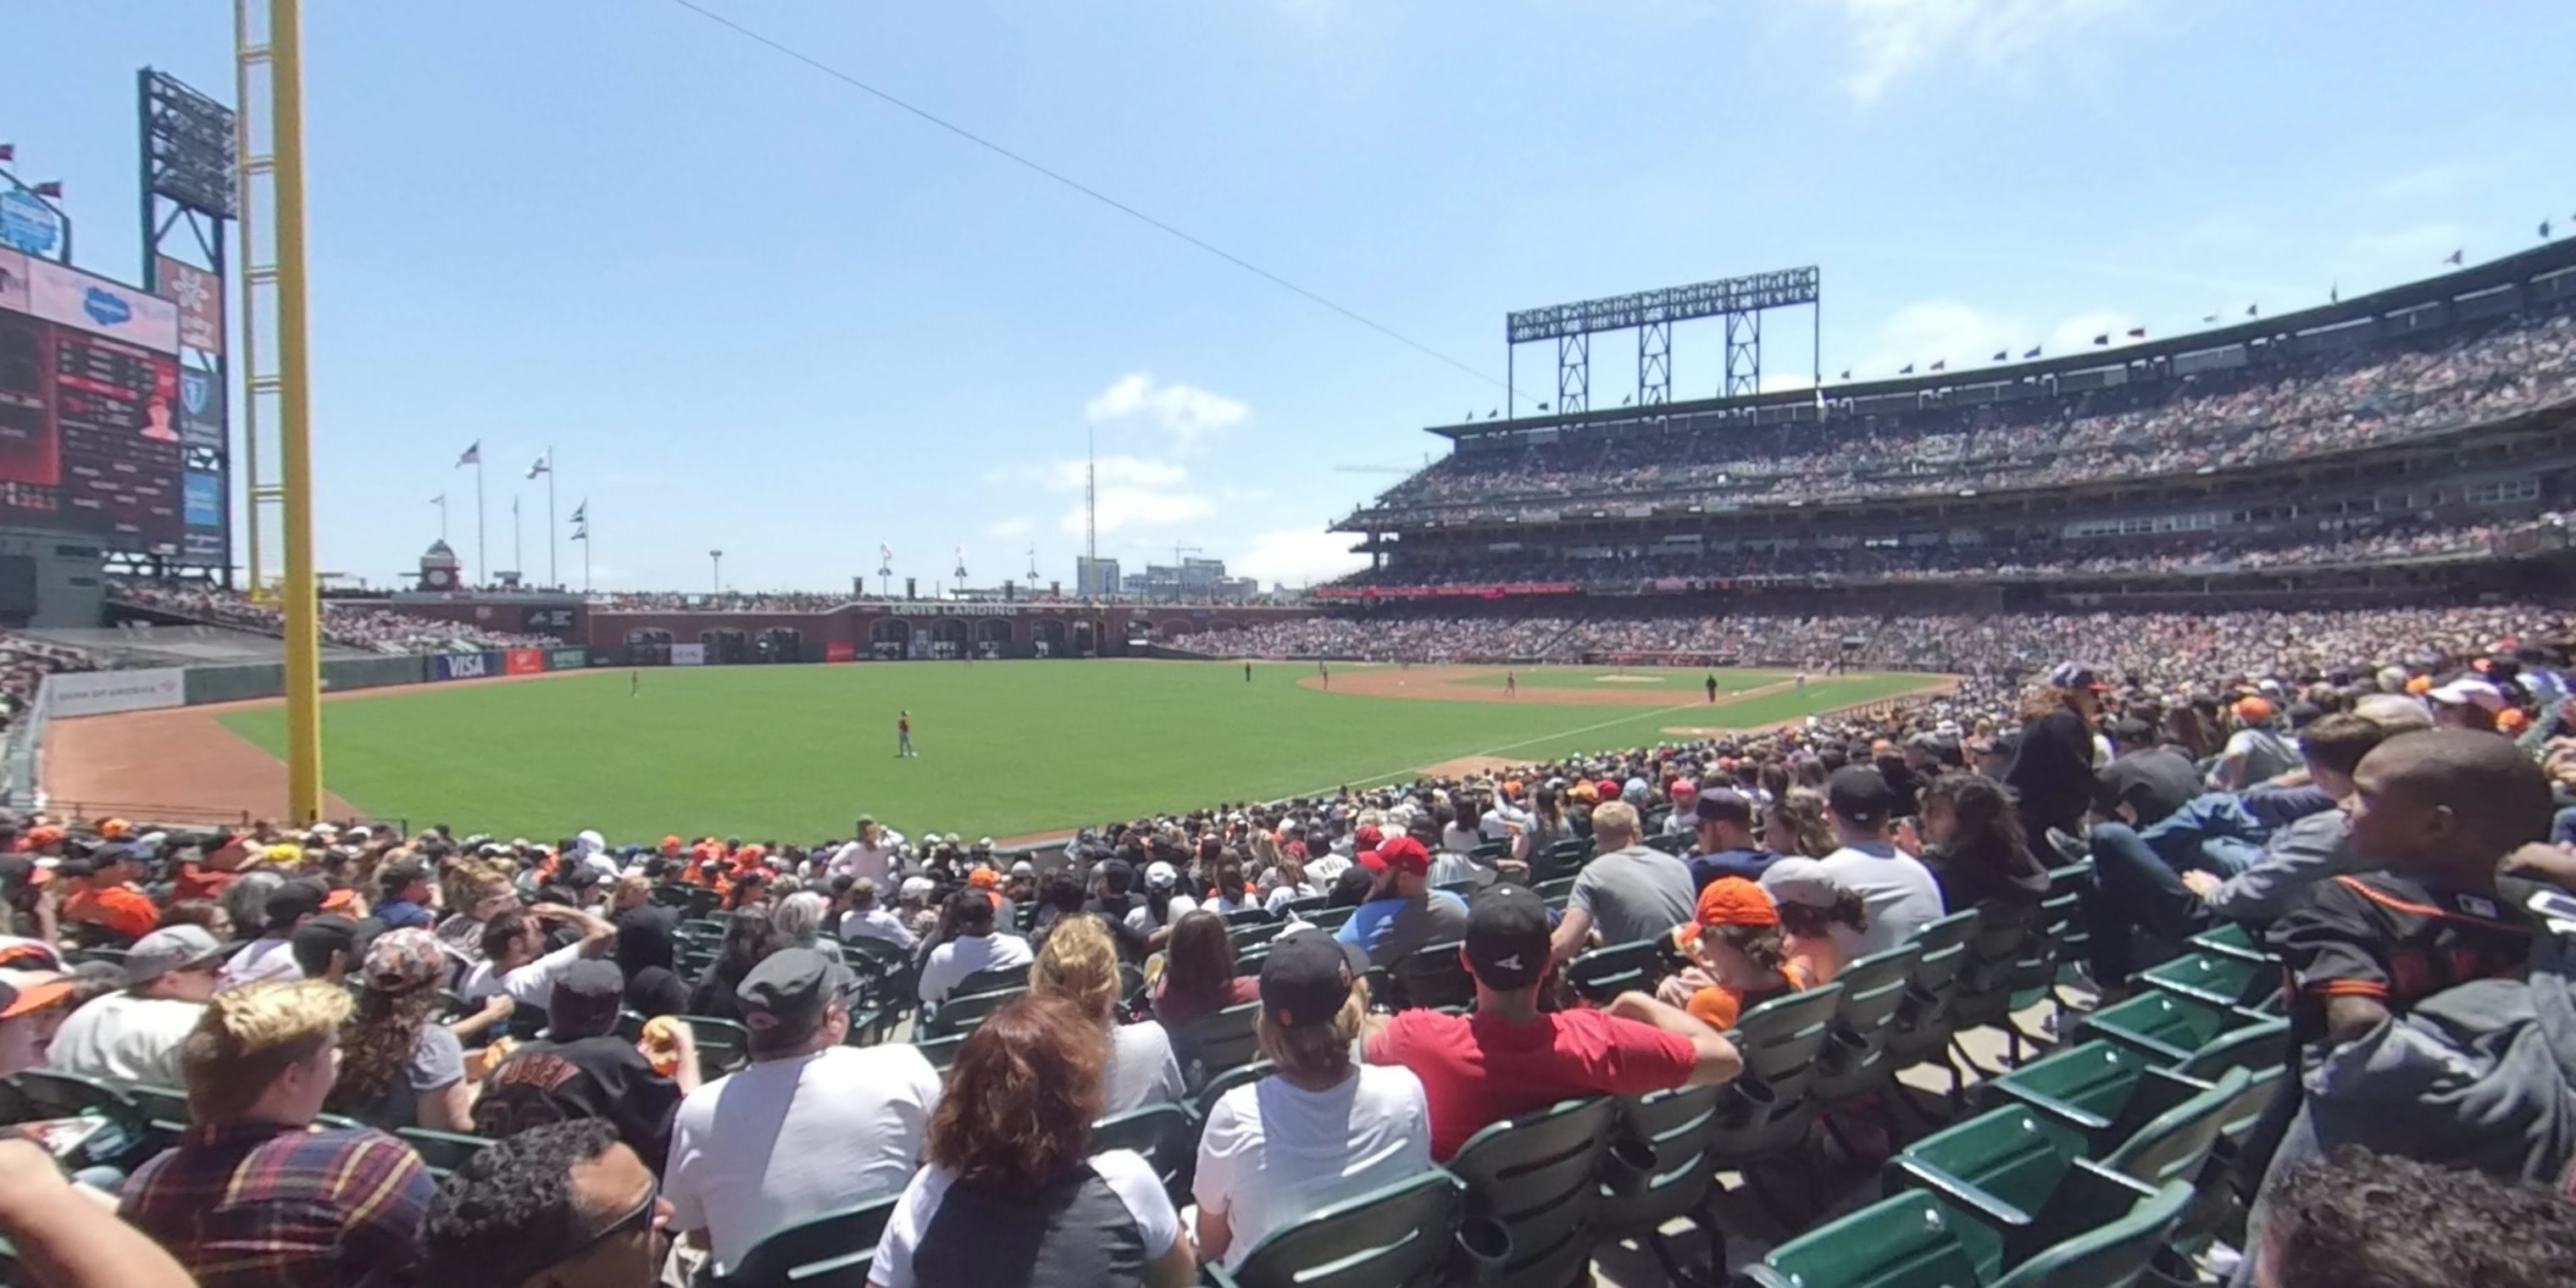 Section 134 at Oracle Park 